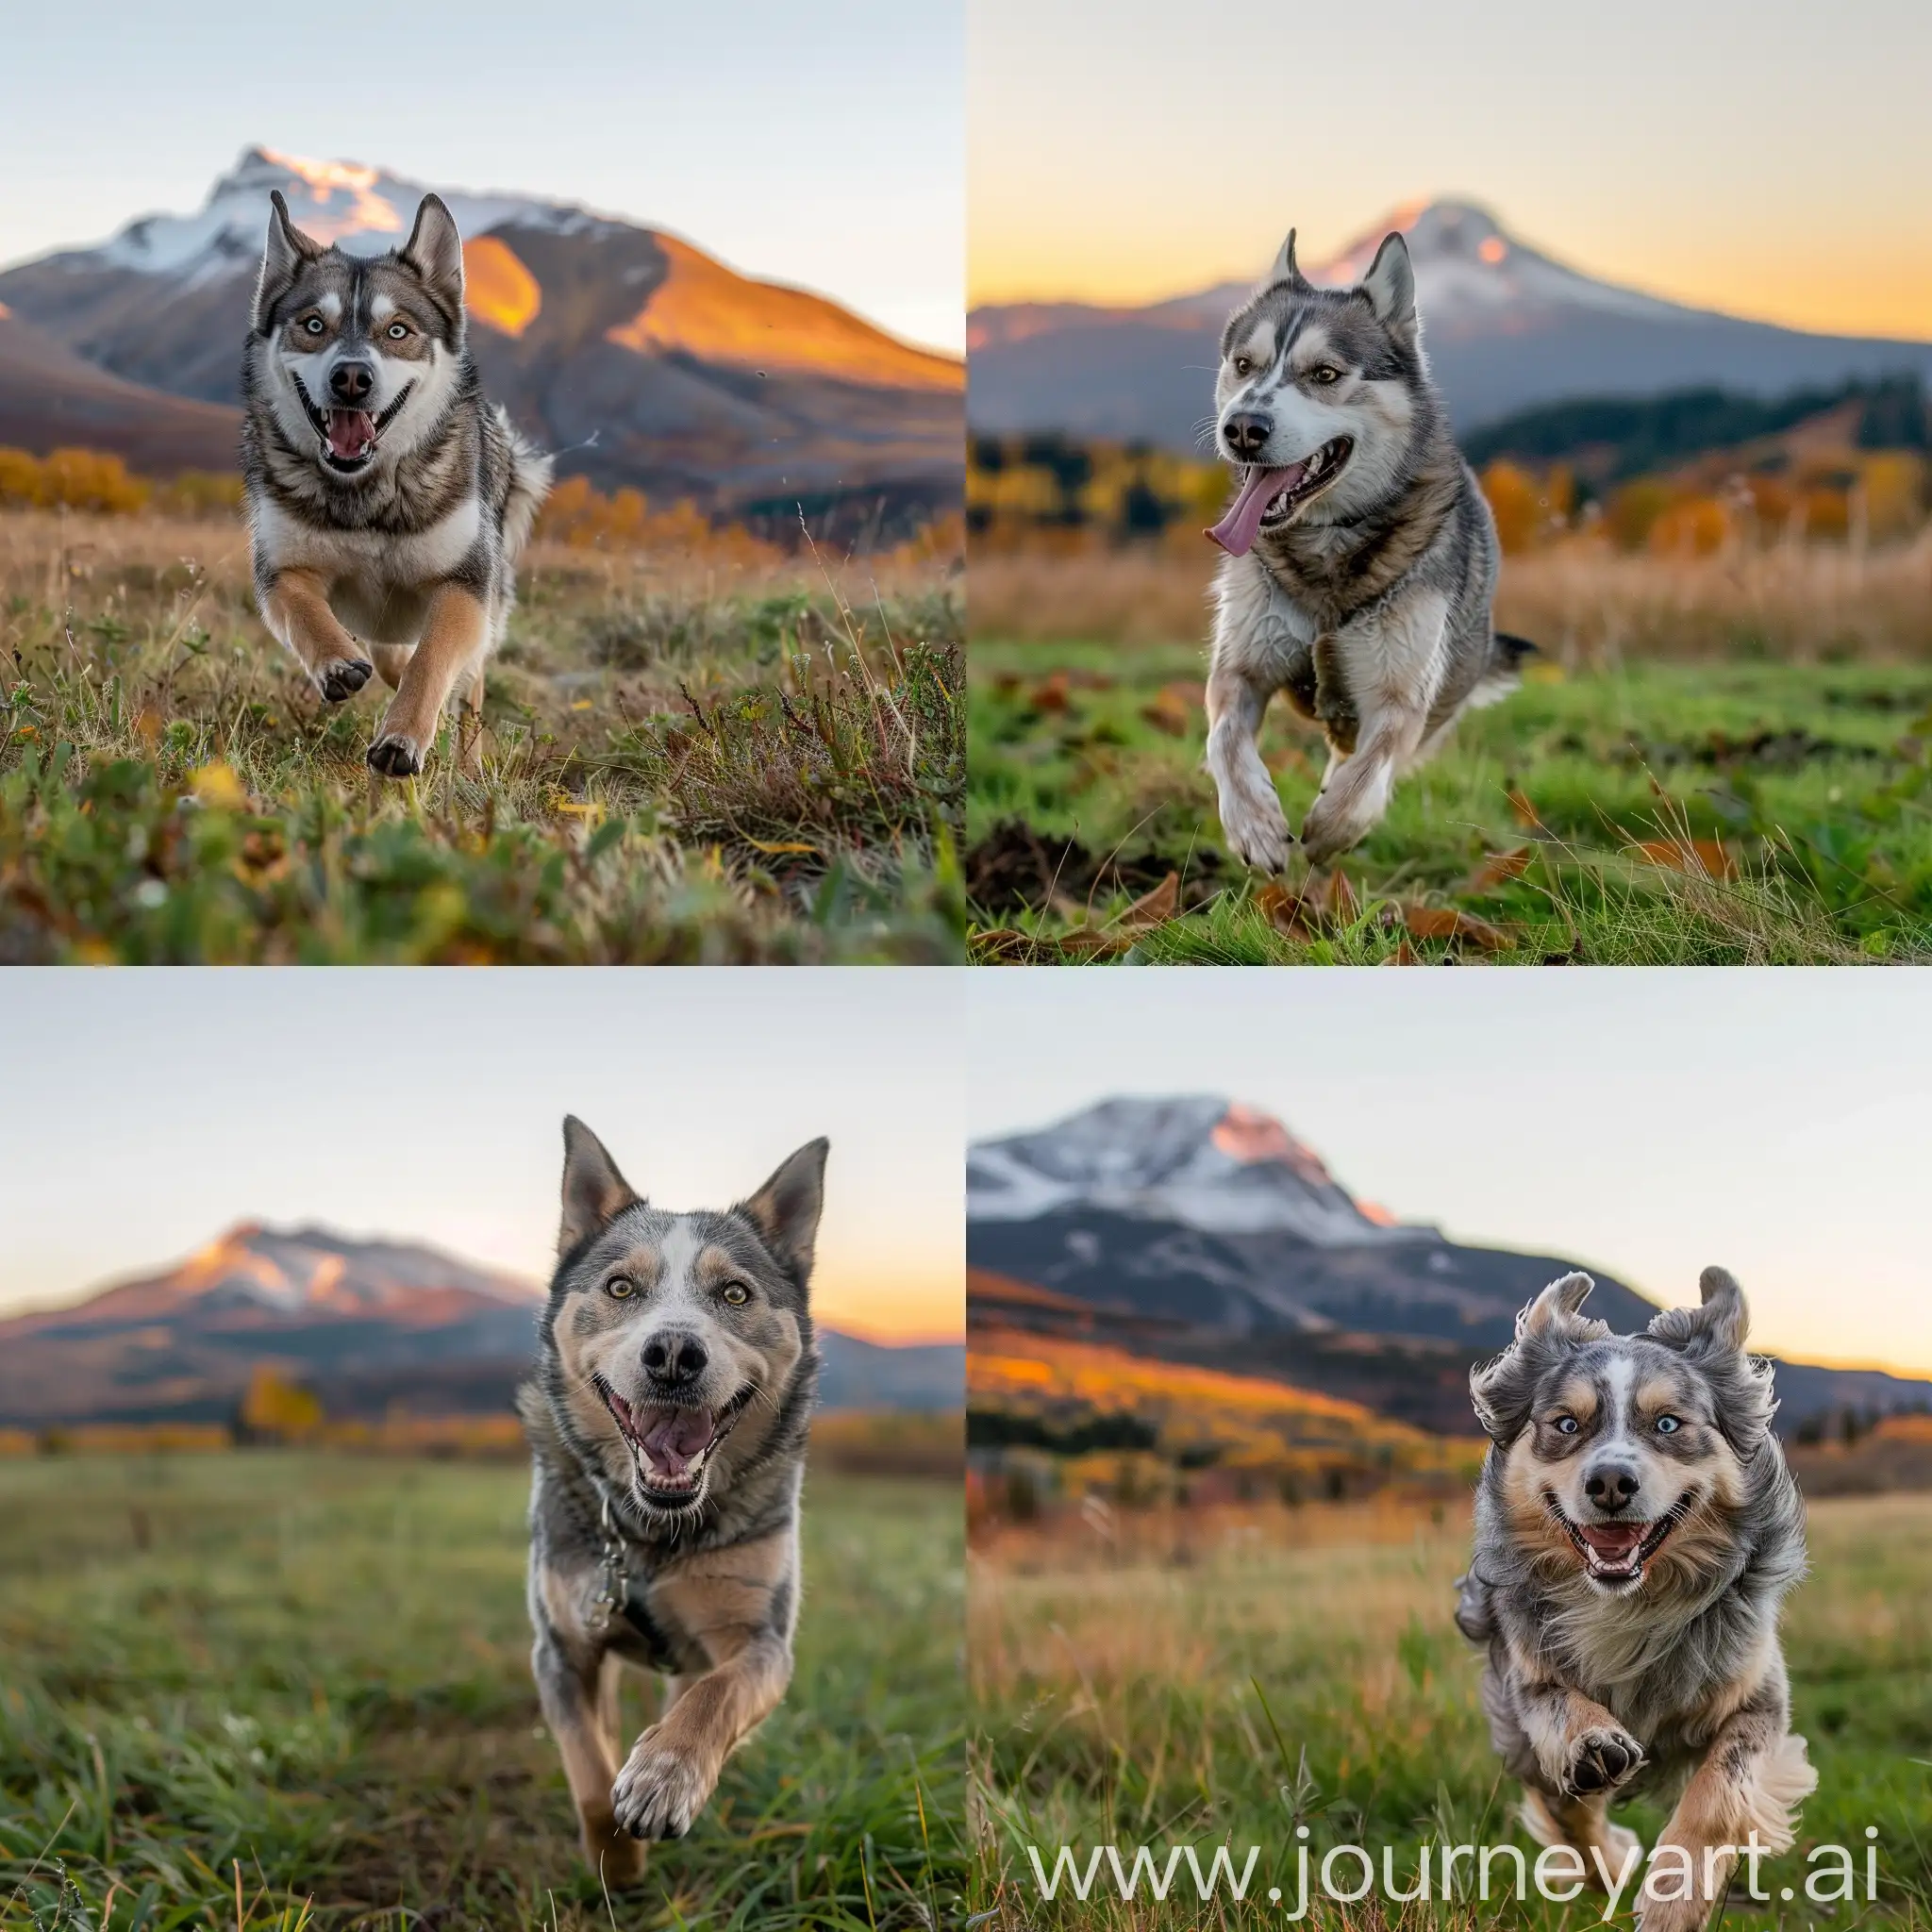 husky dog with gray and brown fur with small white areas happily running through a field in autumn green grass around where a snow mountain can be seen in the backdrop and the sky is clear on a sunny evening almost before twilight orange and yellow glow